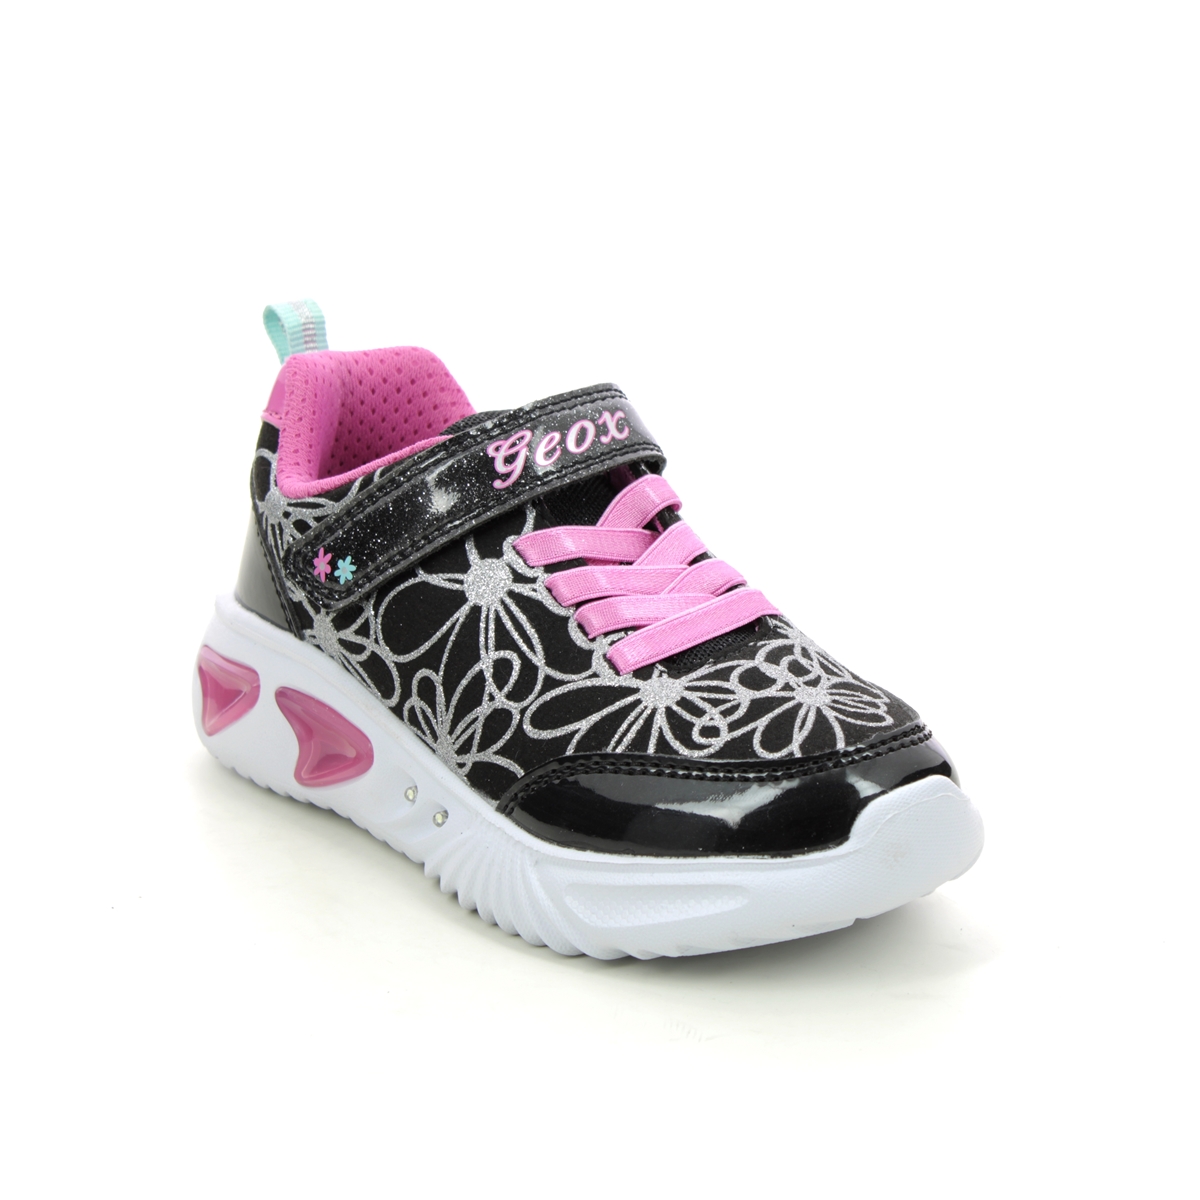 Geox - Assister Lights (Black Pink) J26E9A-C0922 In Size 28 In Plain Black Pink For kids